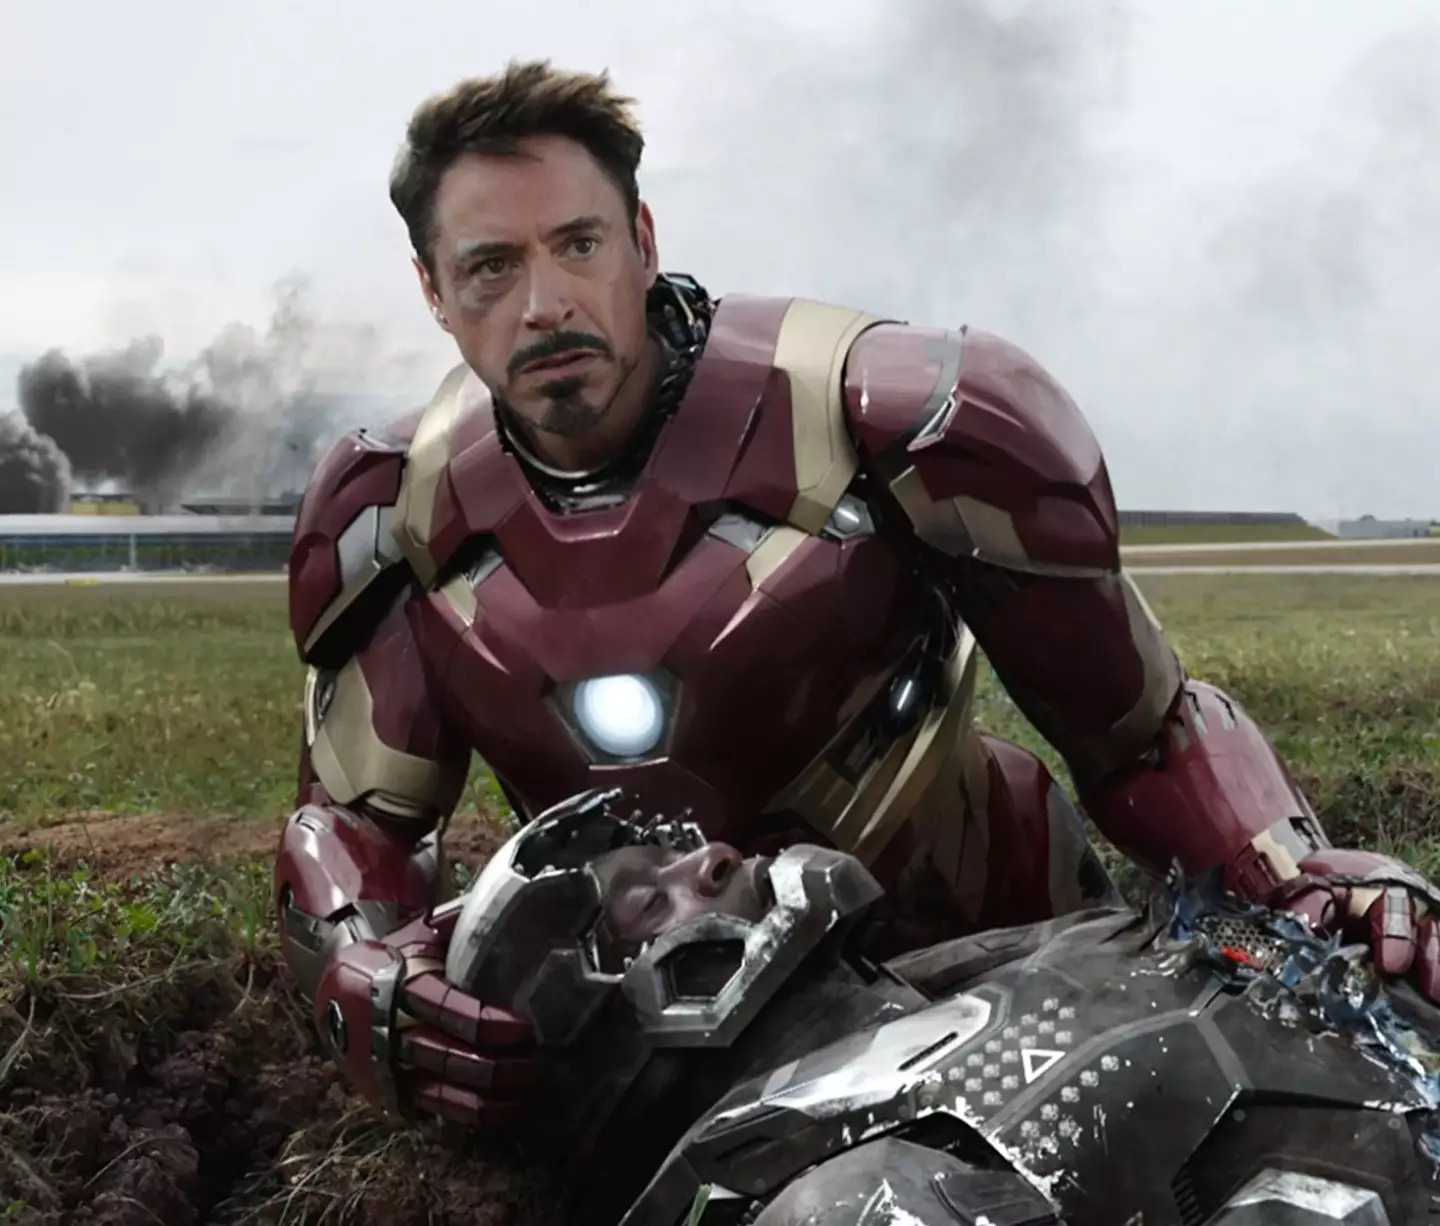 Downey Jr. was worried about the impact the Marvel series had had on his acting skills.